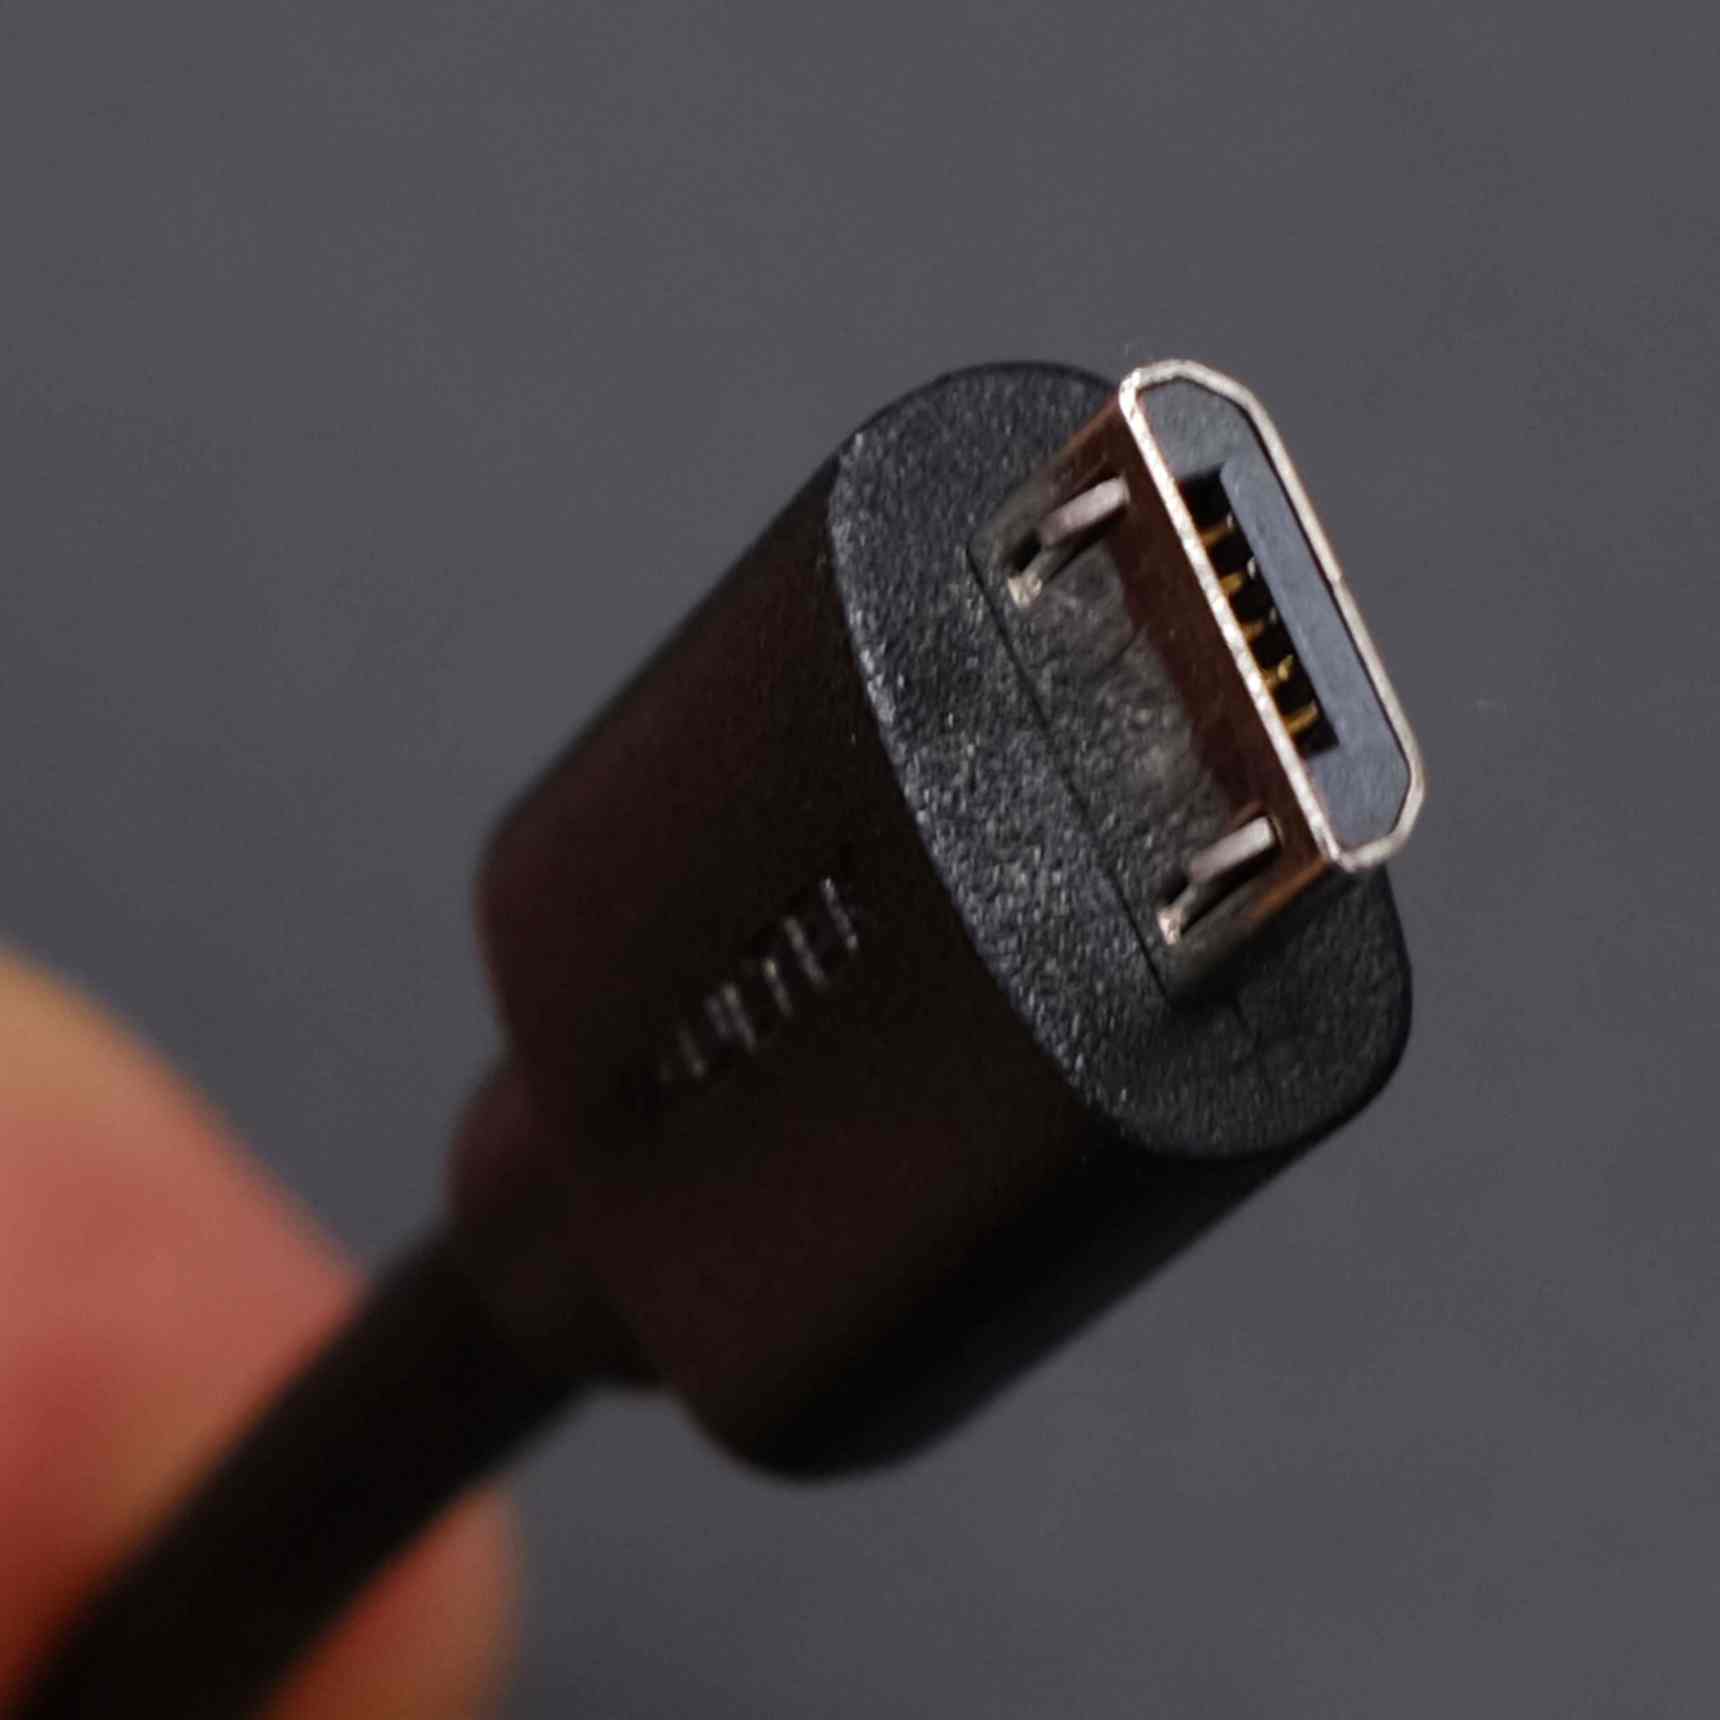 Black Micro USB Cable 3 A Fast Charging Data Charger Cables Fast Charger Micro Usb